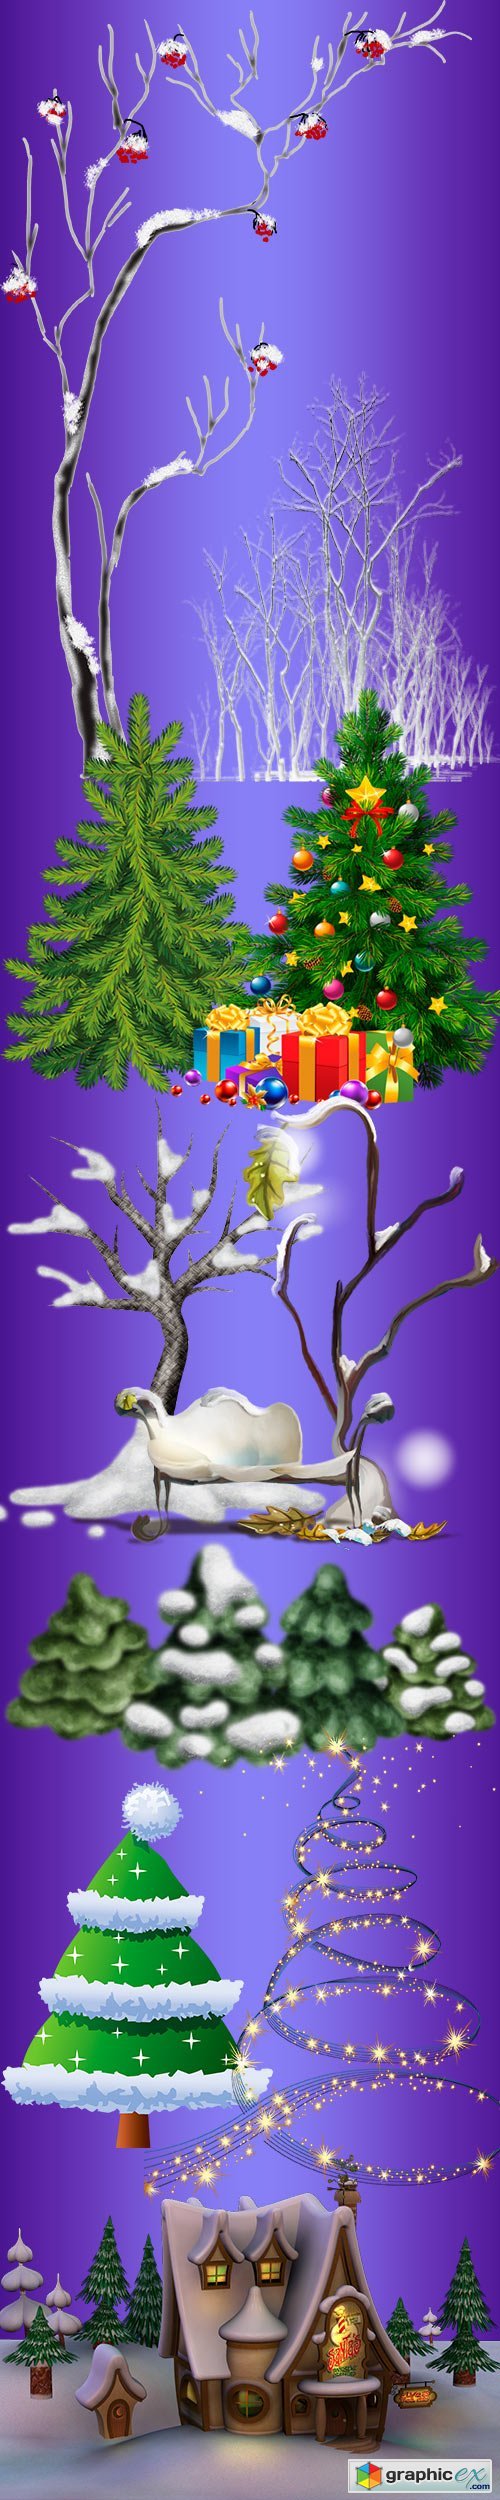 Clipart - Christmas trees and winter trees